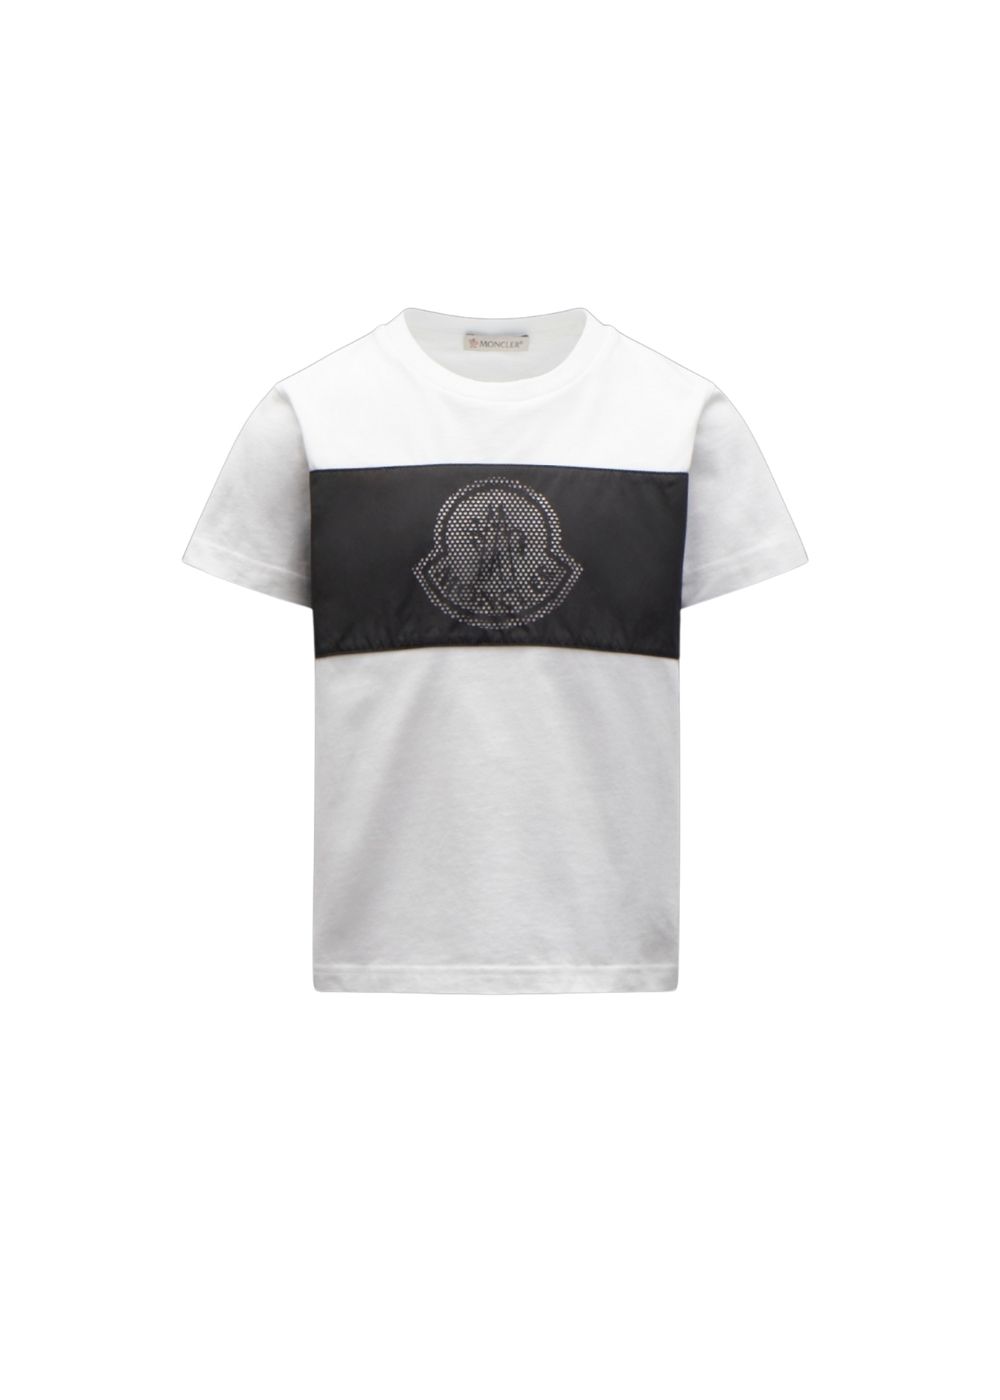 Featured image for “Moncler T-shirt Logo Laserato”